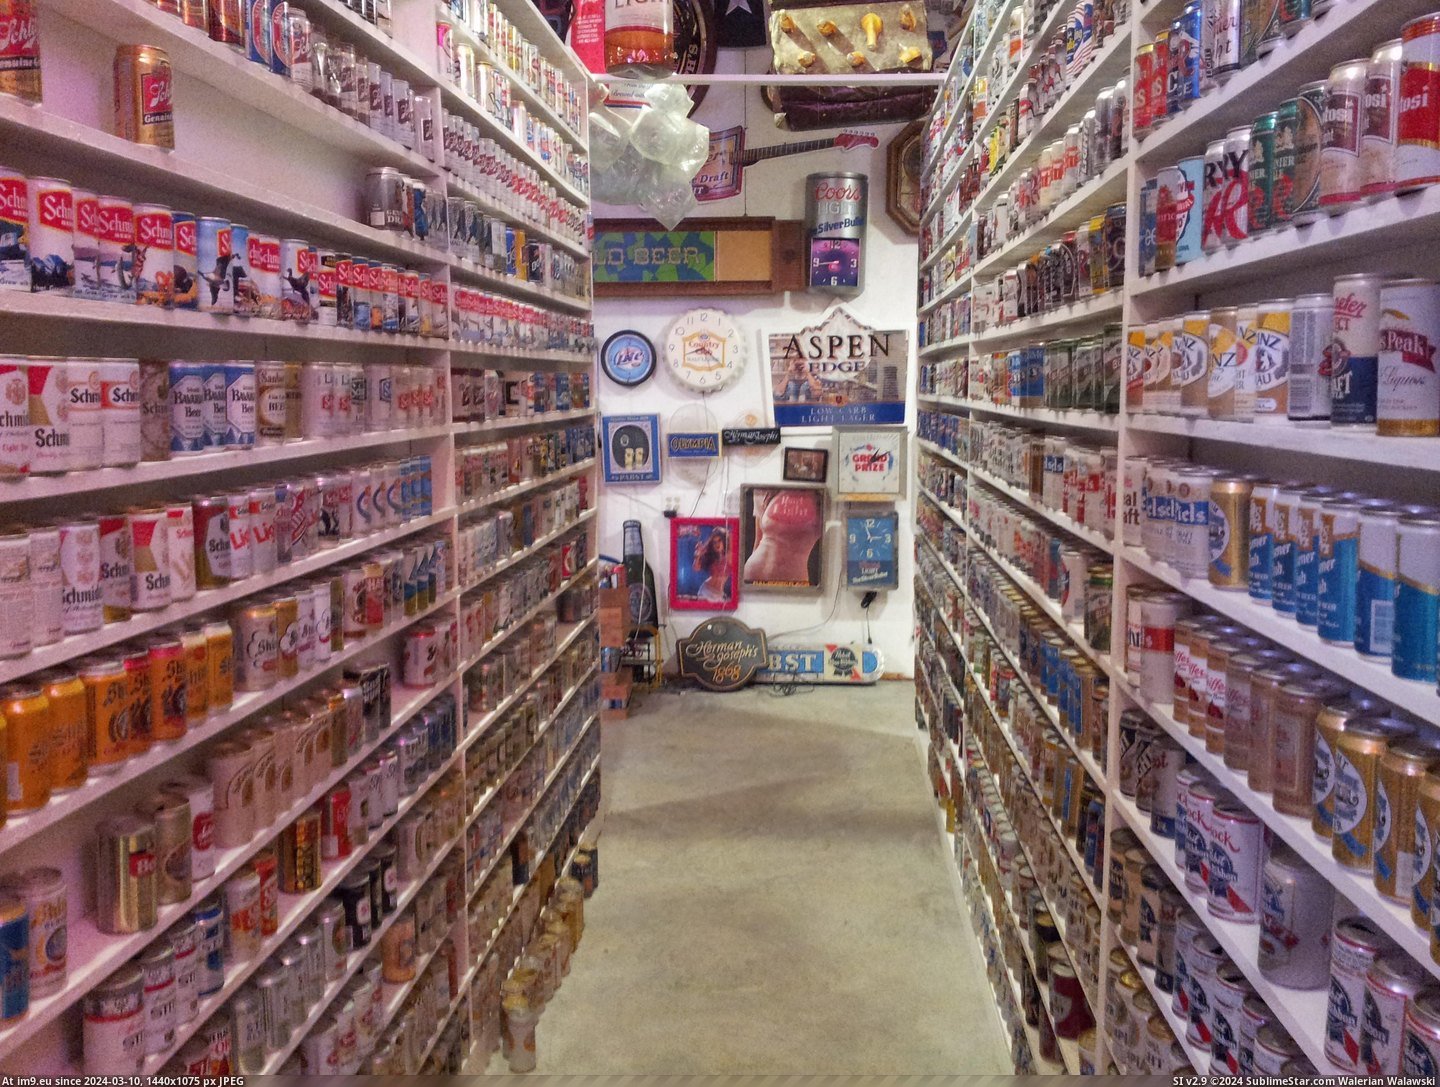 #Collection #For #Years #Grandpa #Cans #Collecting #Share #Thought #Beer [Pics] My grandpa has been collecting beer cans for over thirty years, so I thought I would go ahead and share his collection wi Pic. (Изображение из альбом My r/PICS favs))